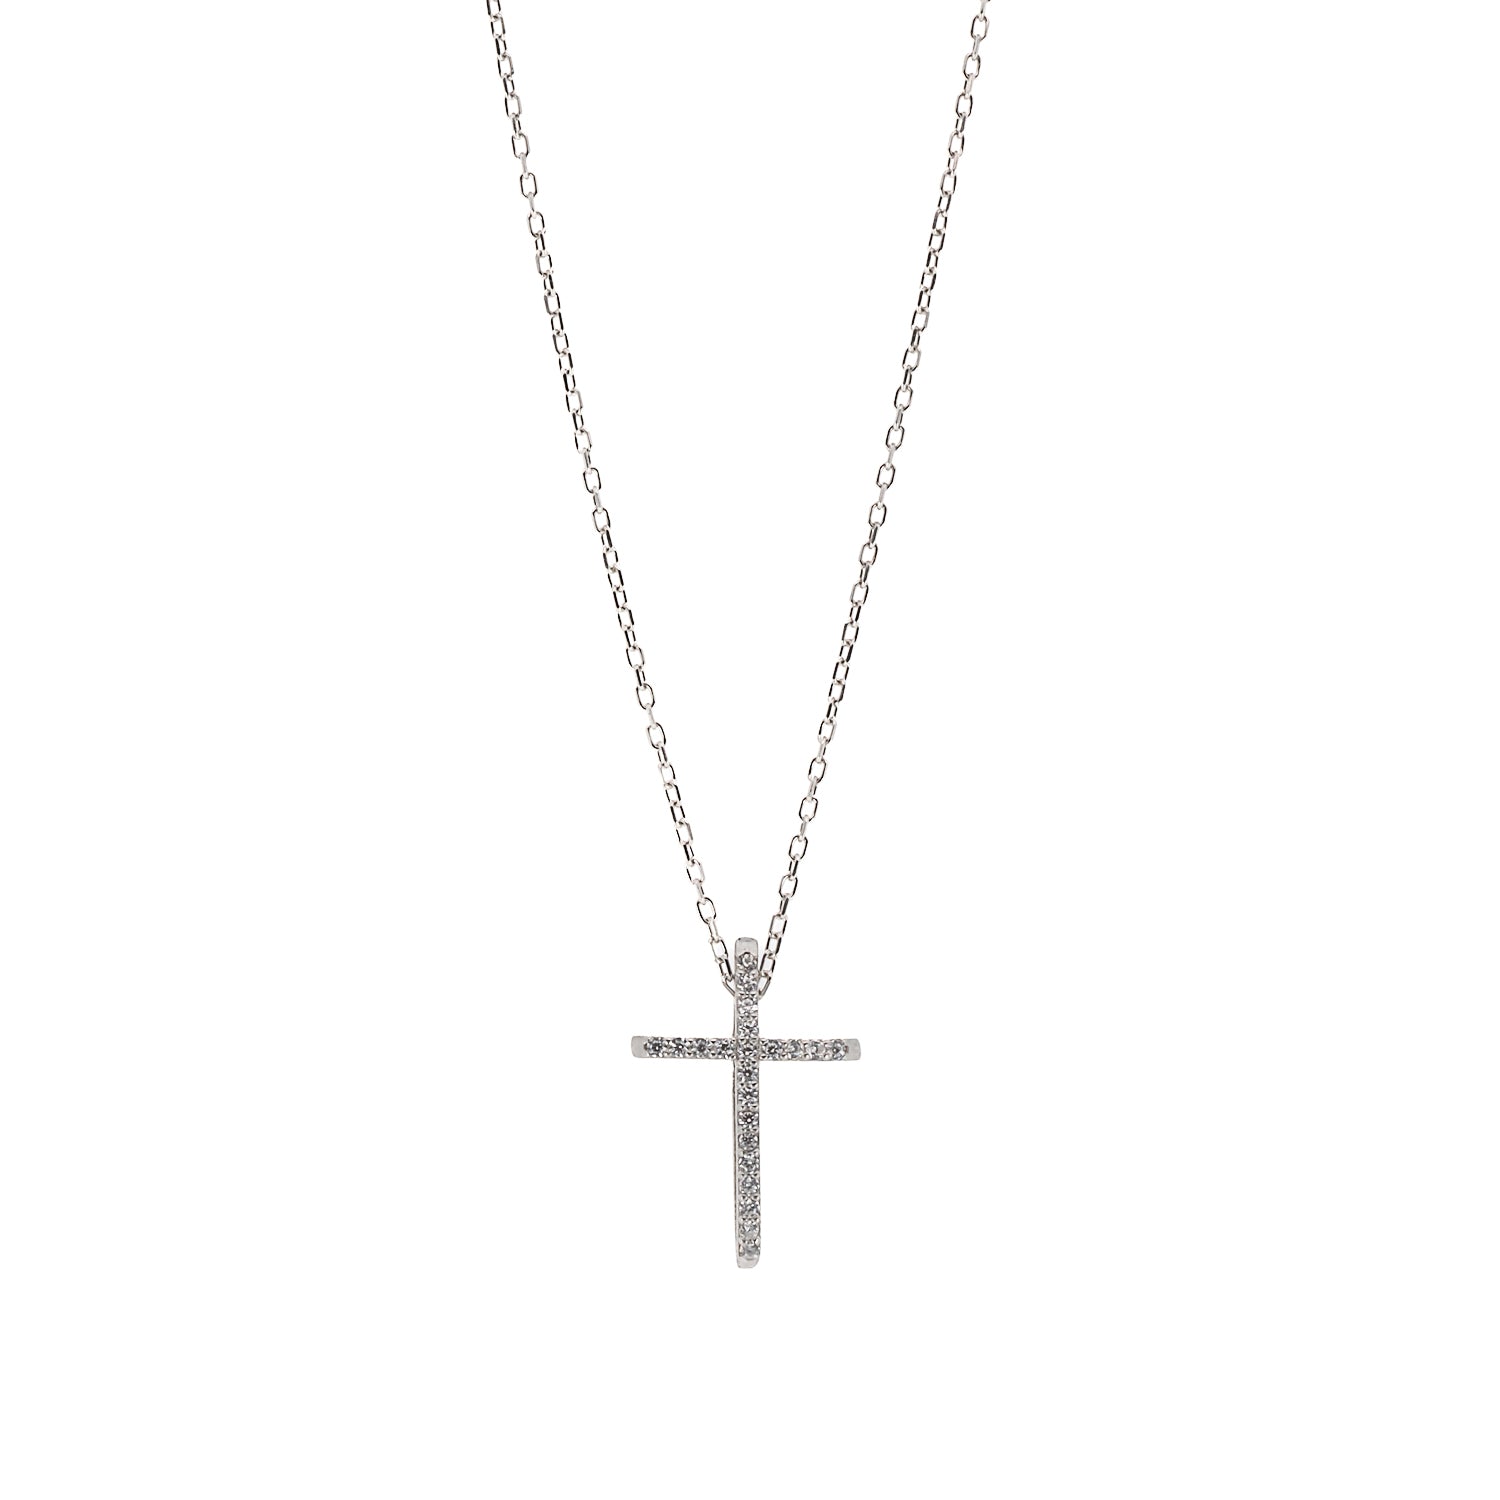 The cross is a powerful and universally recognized symbol of faith, hope, and spirituality. It serves as a reminder of one's beliefs and can provide comfort, strength, and guidance in challenging times. 